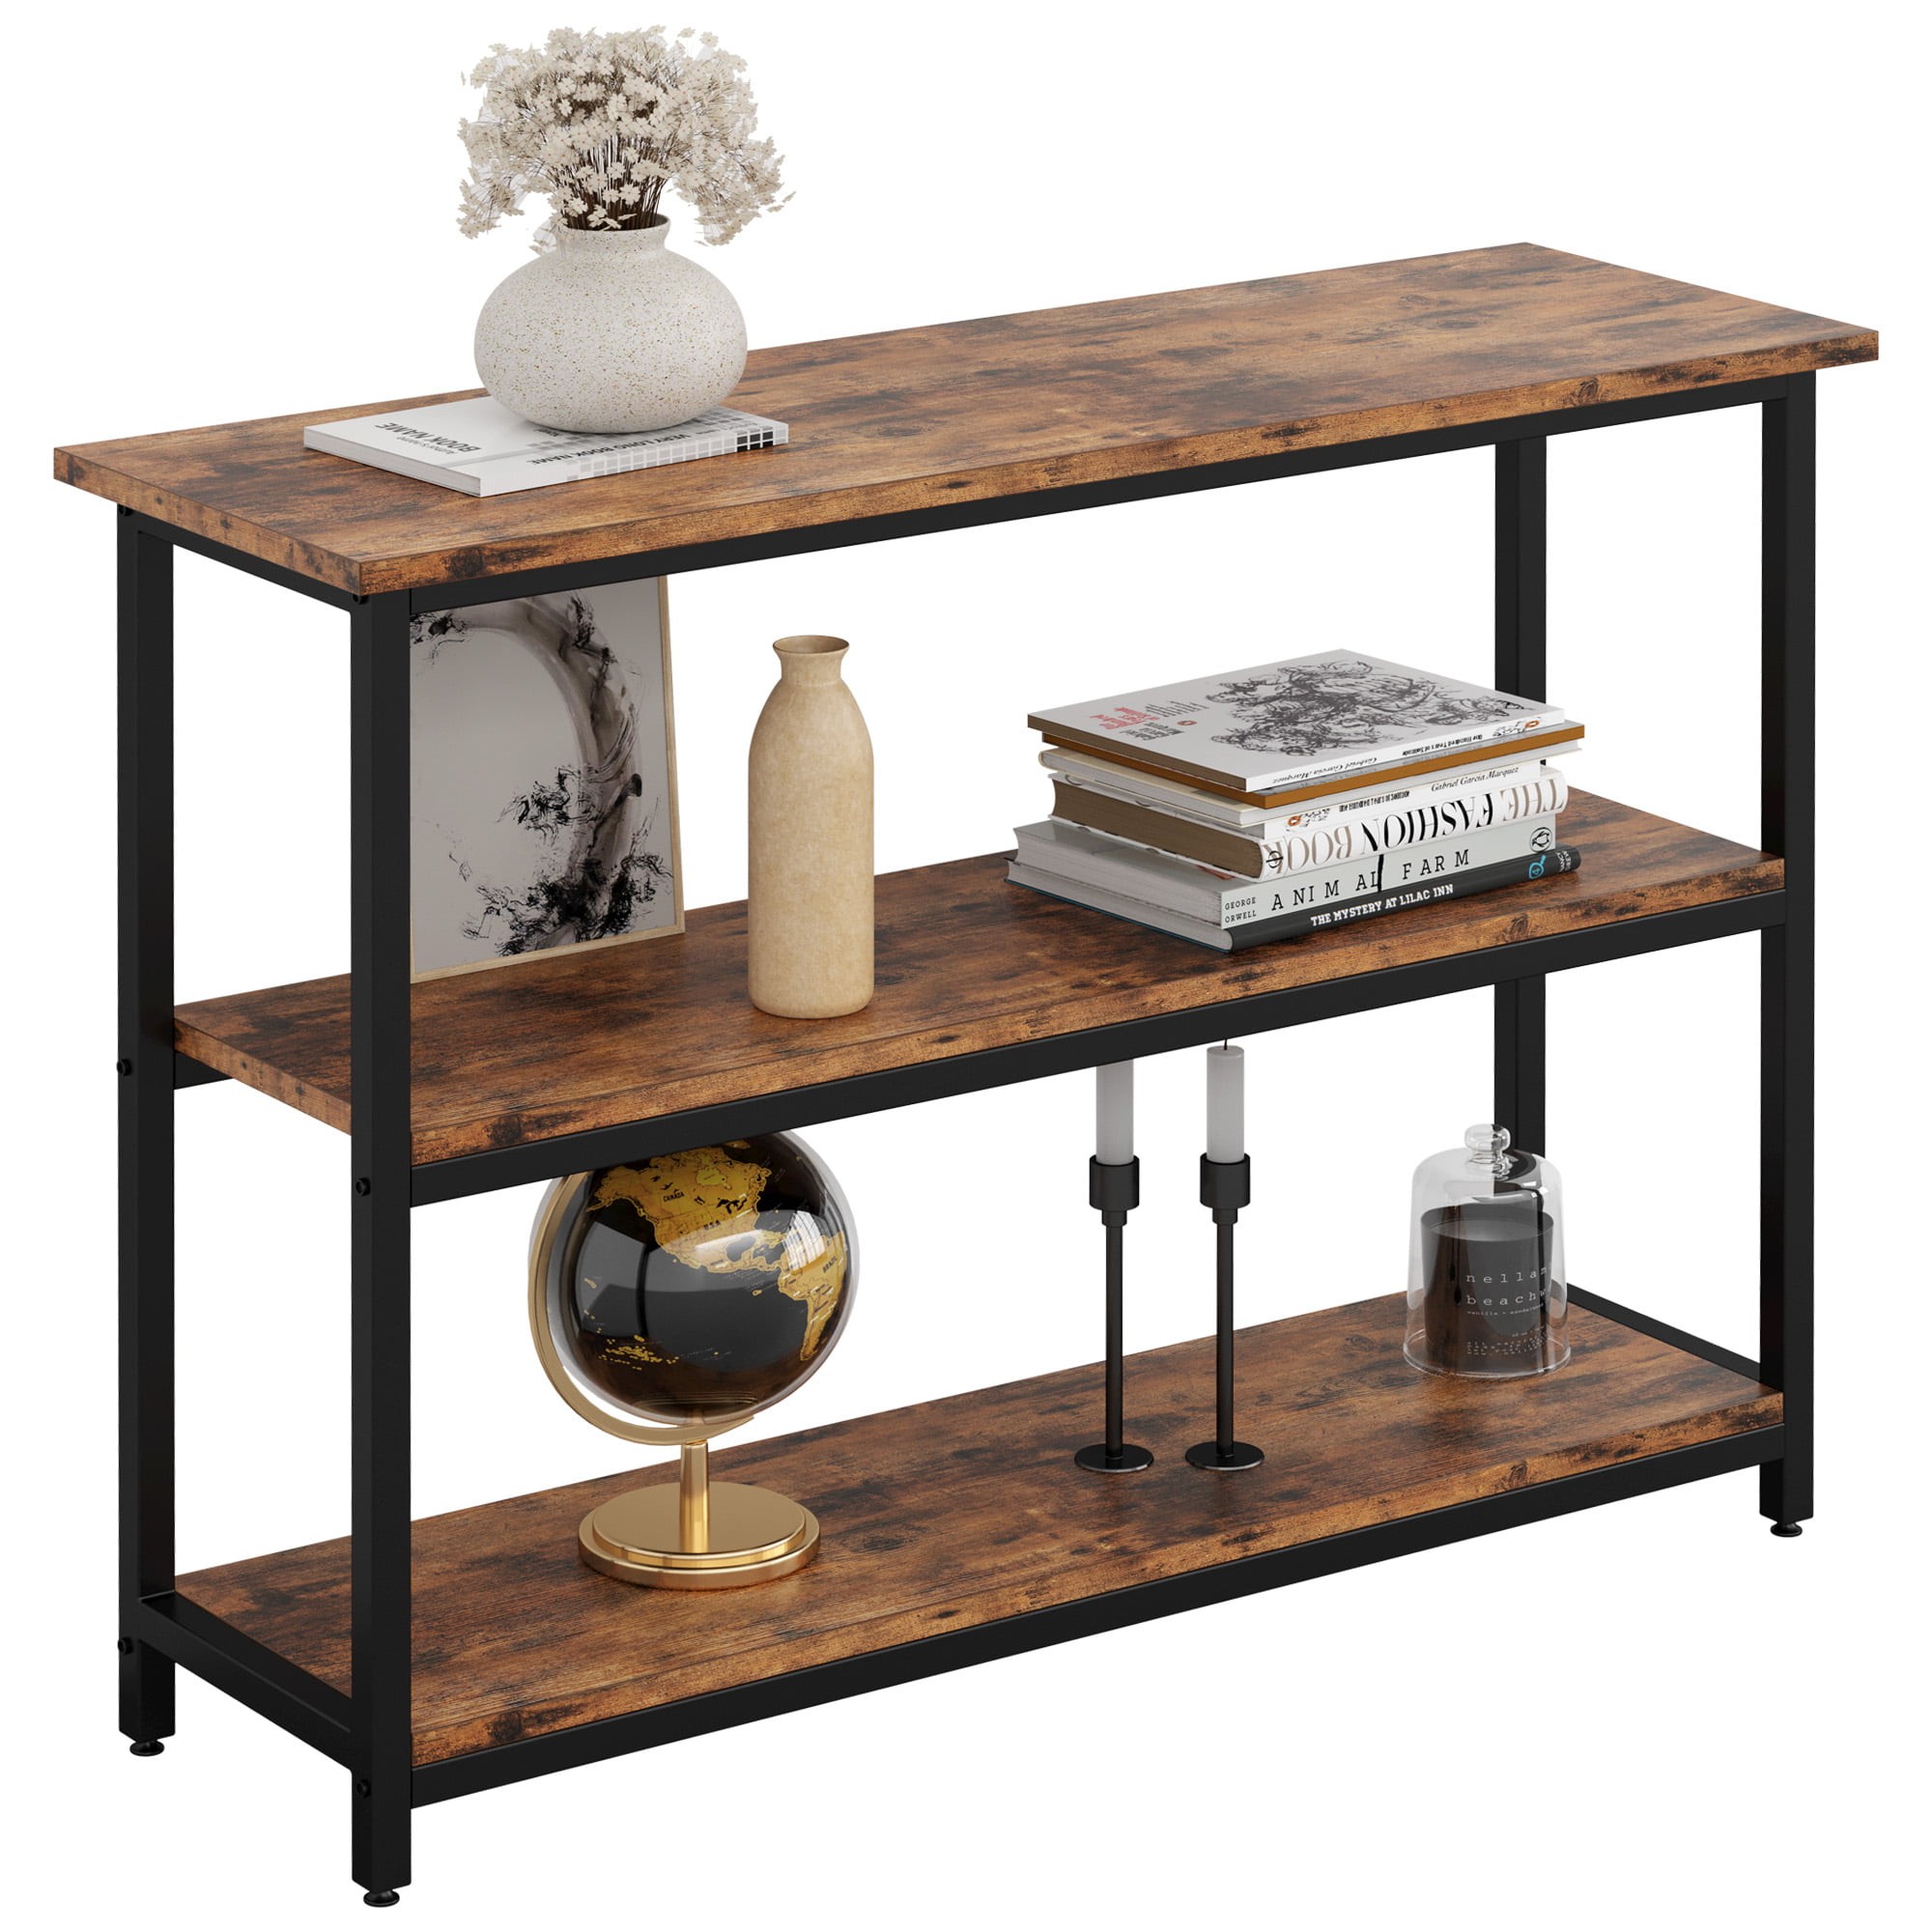 IRONCK Sofa Table, Console Table with Storage, Narrow Hallway Table for  Entryway, Space-Saving, 3 Tier Rustic Media Stand for Living Room,  Industrial 